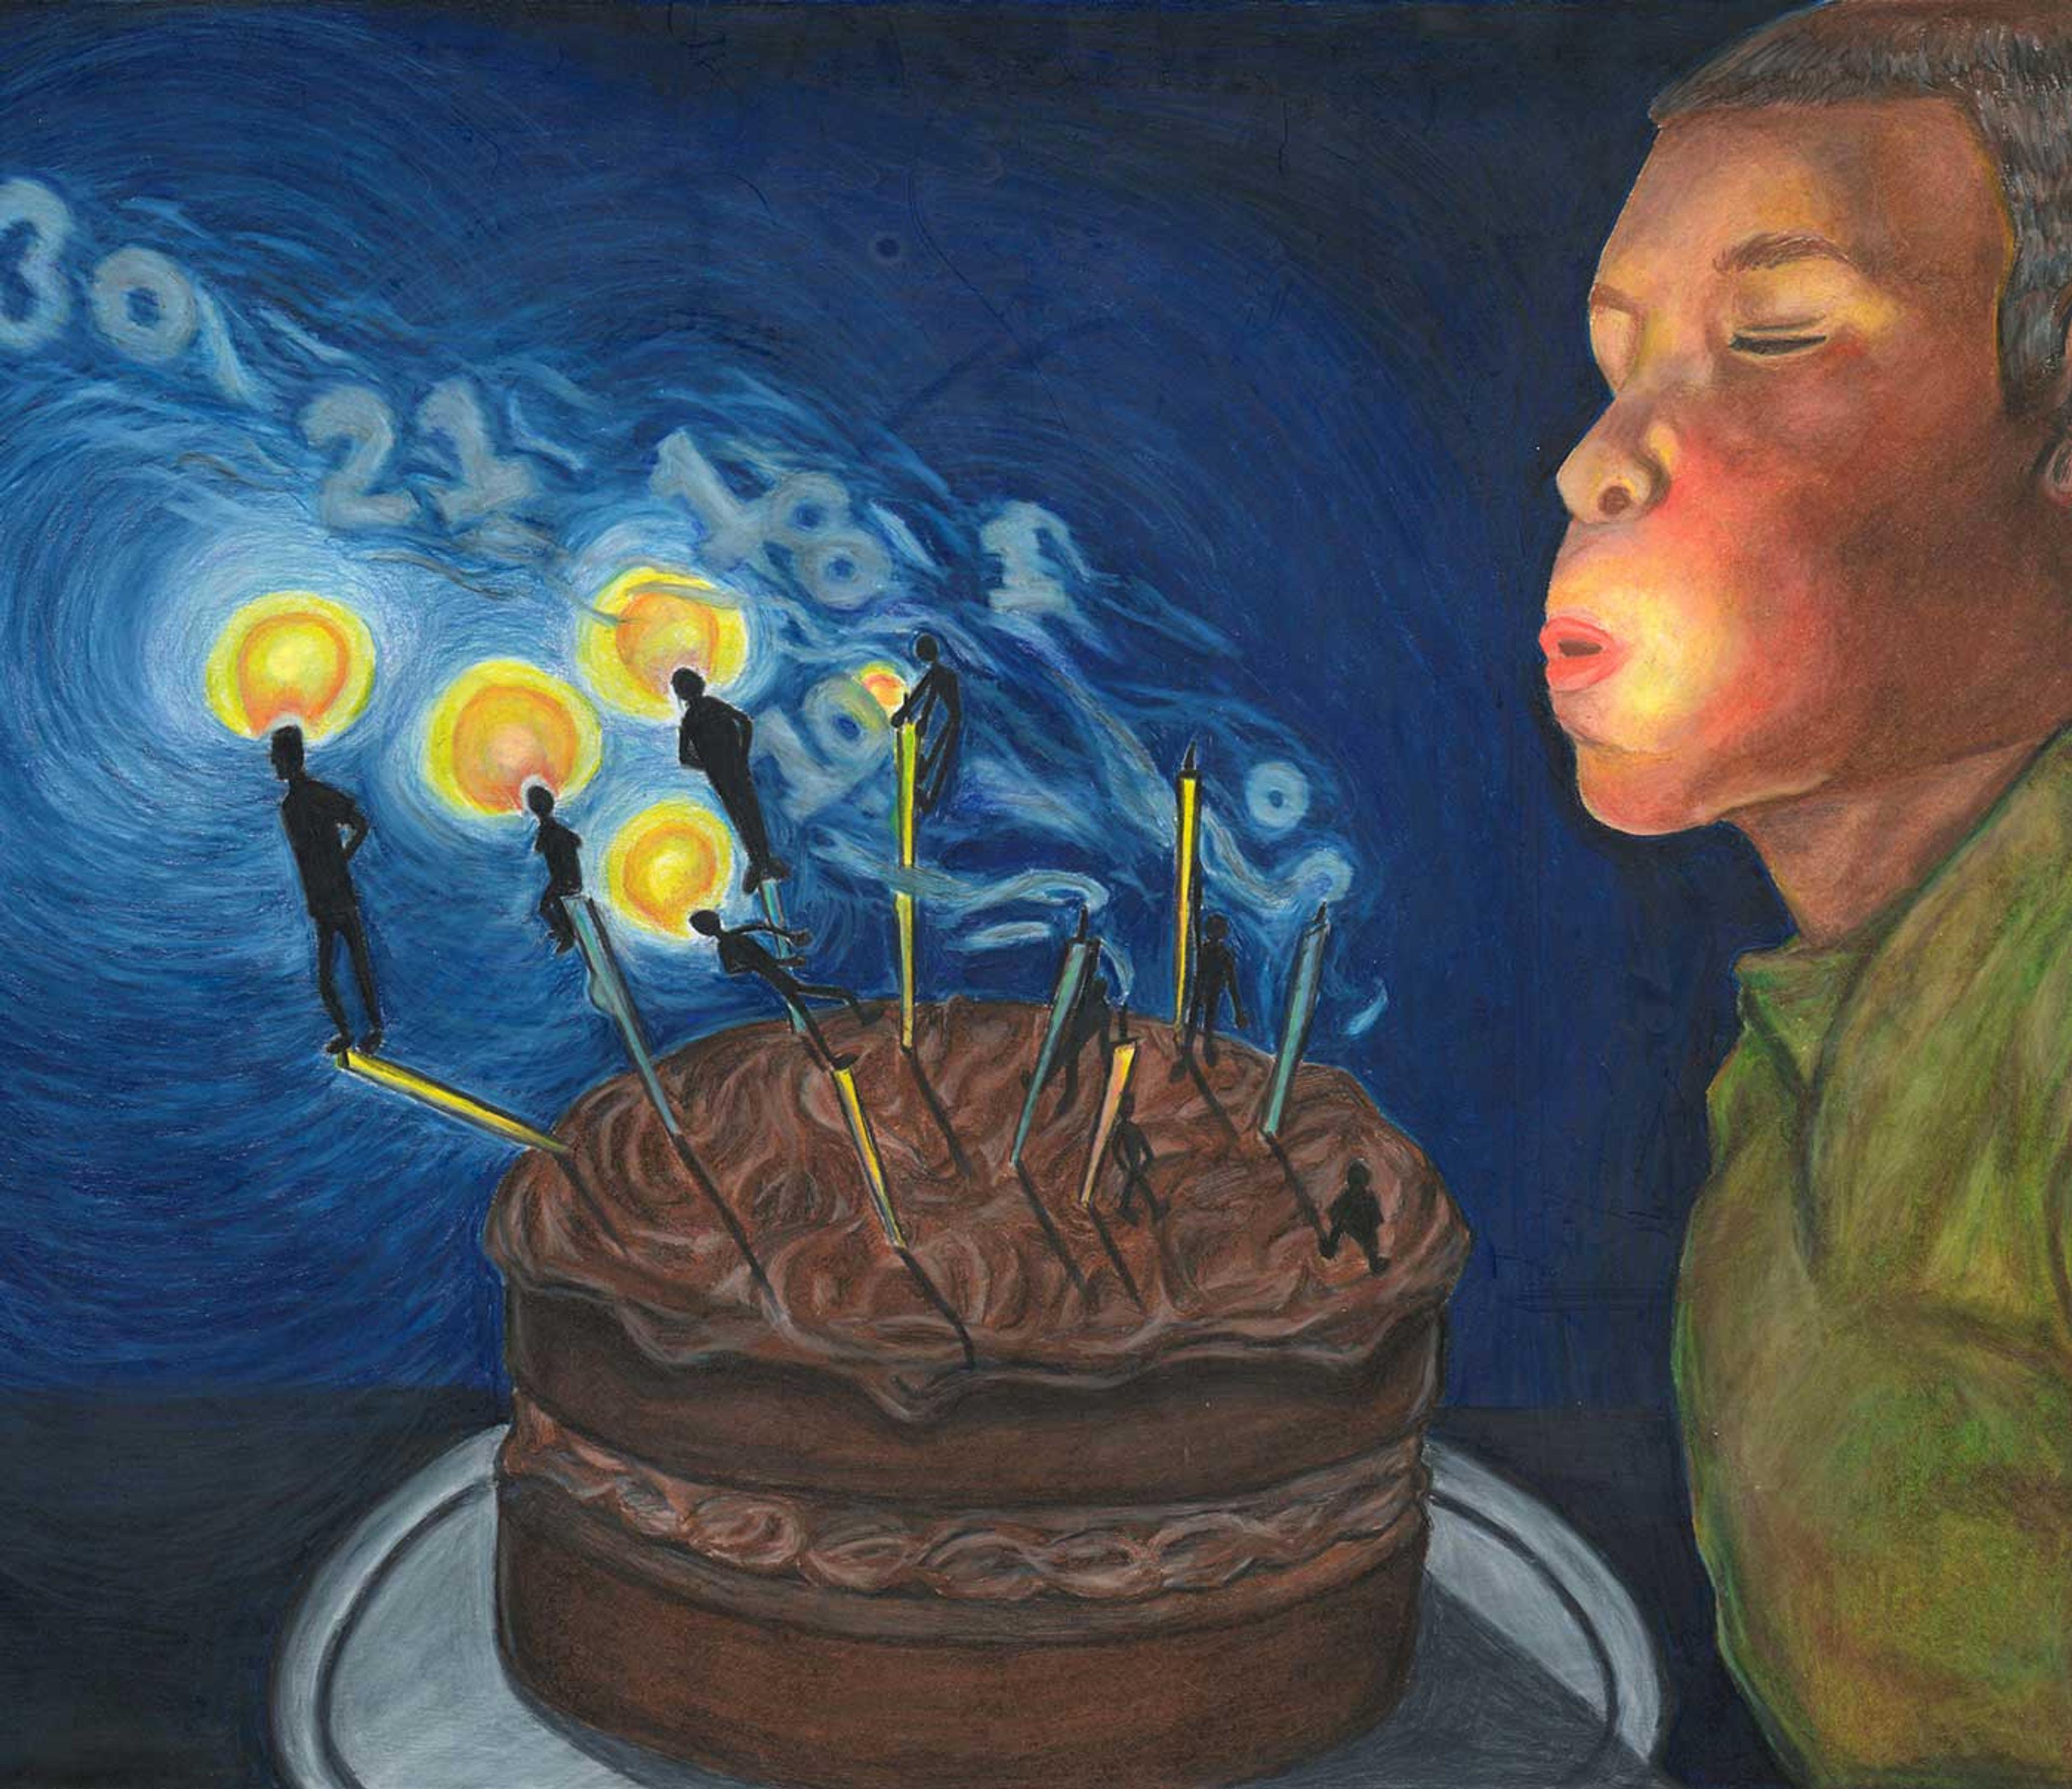 Drawing of a child blowing out birthday candles, with silhouettes of people at the top of each candle.